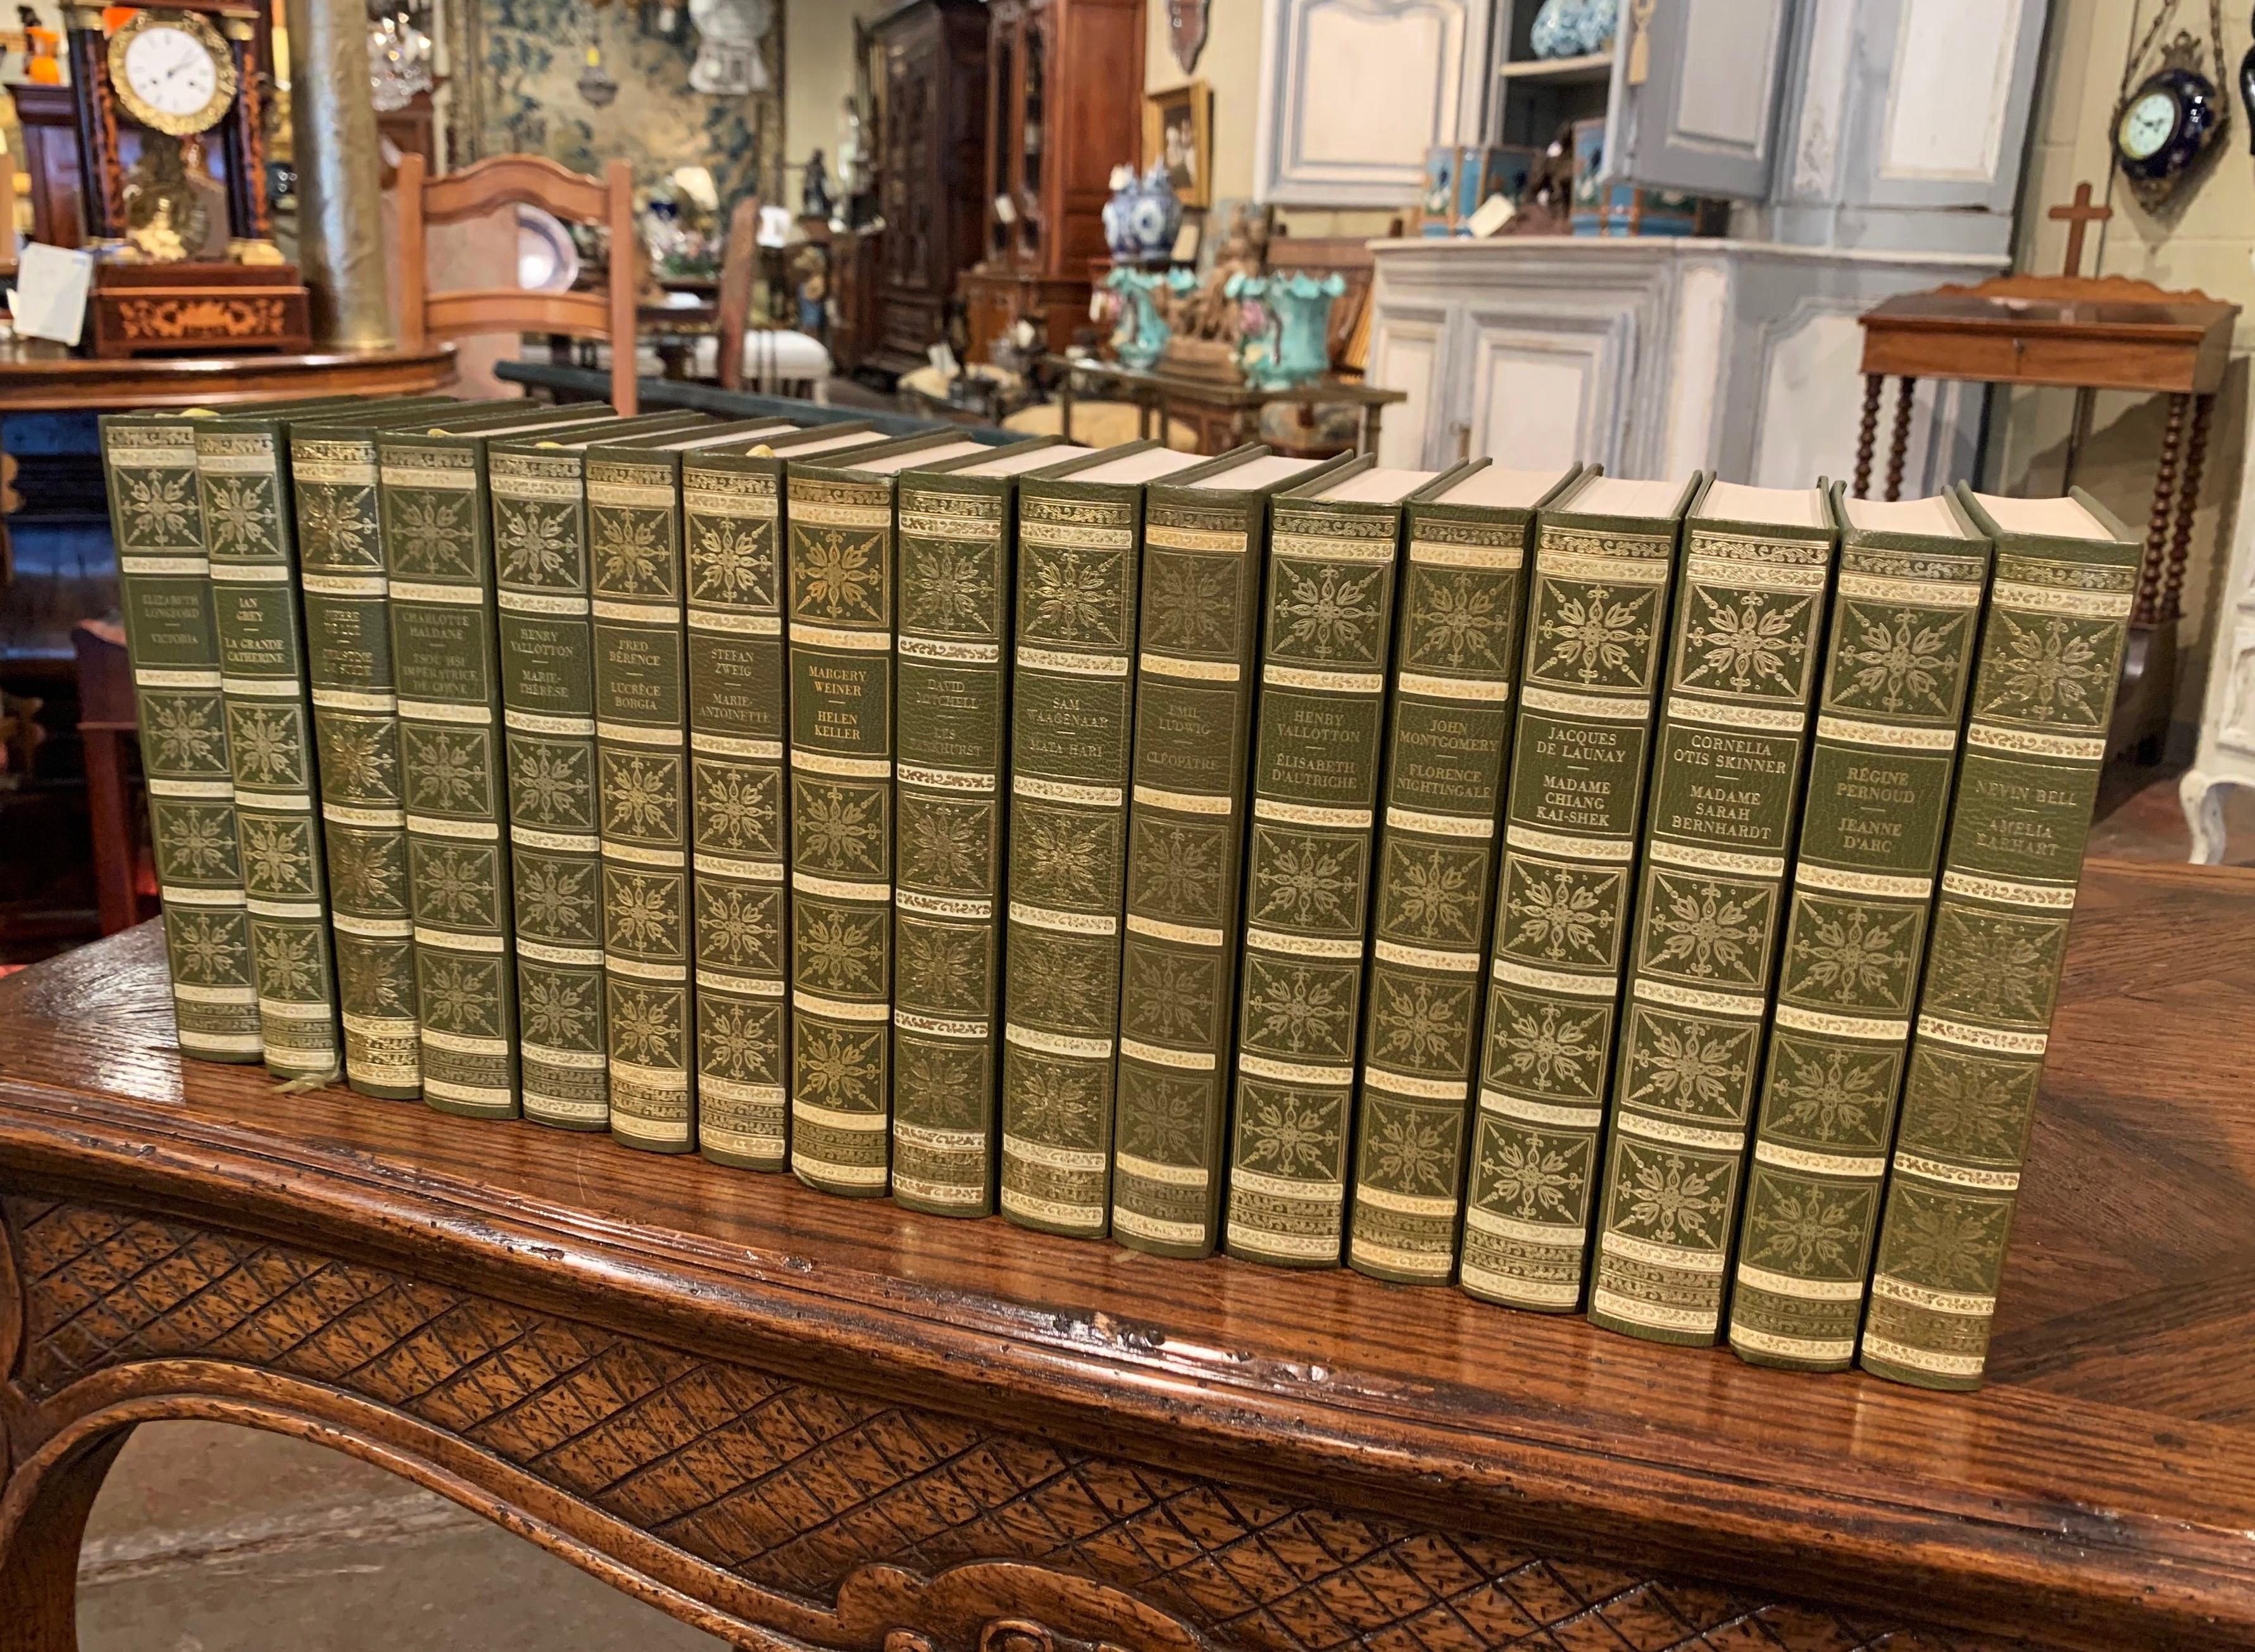 Decorate an office bookcase or library shelf with this elegant set of 17 vintage leather-bound books; printed in France circa 1971 by Bernard Grasset, each book illustrates the life of 